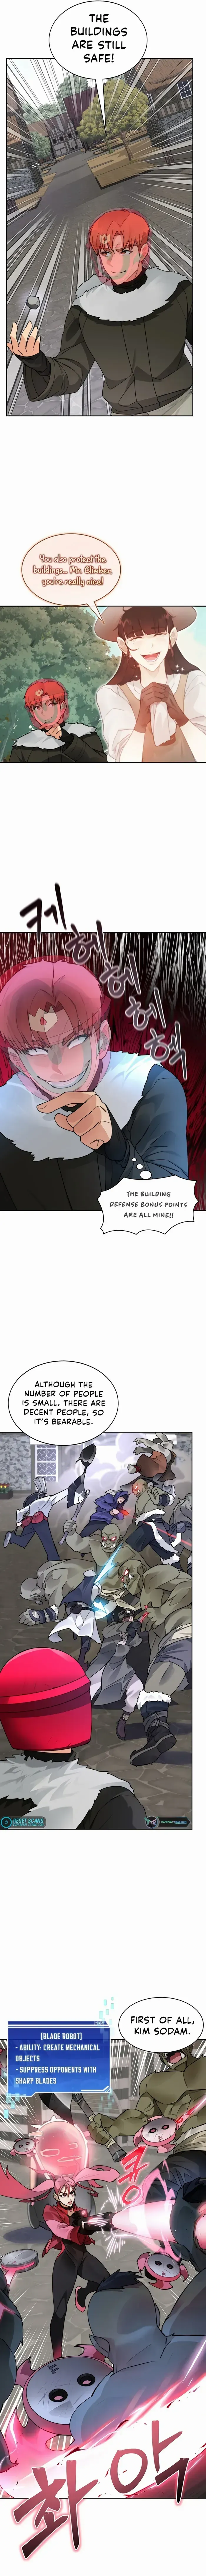 Stuck In The Tower - Page 2